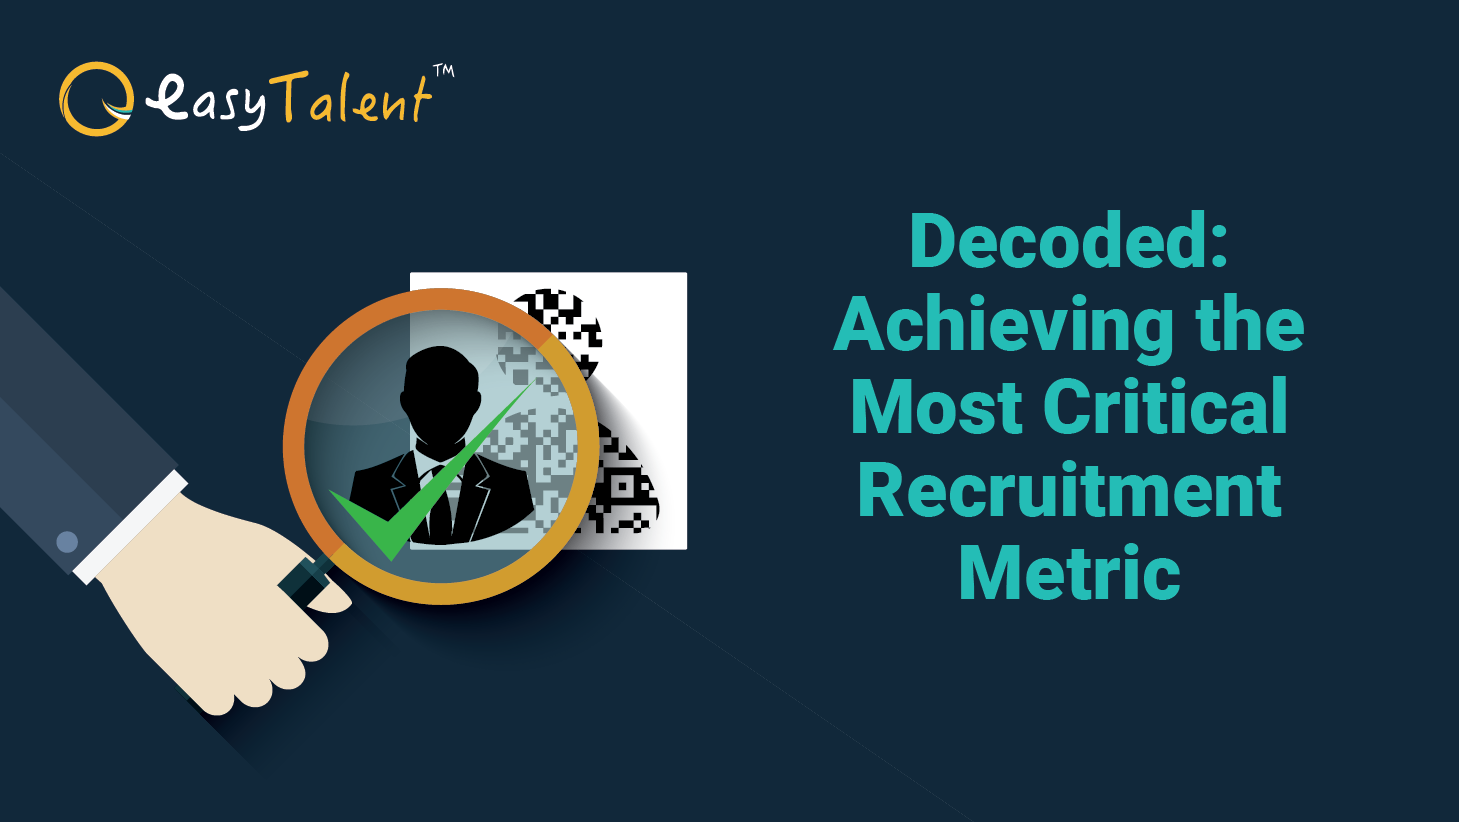 roadmap to achieving the most critical recruitment metric